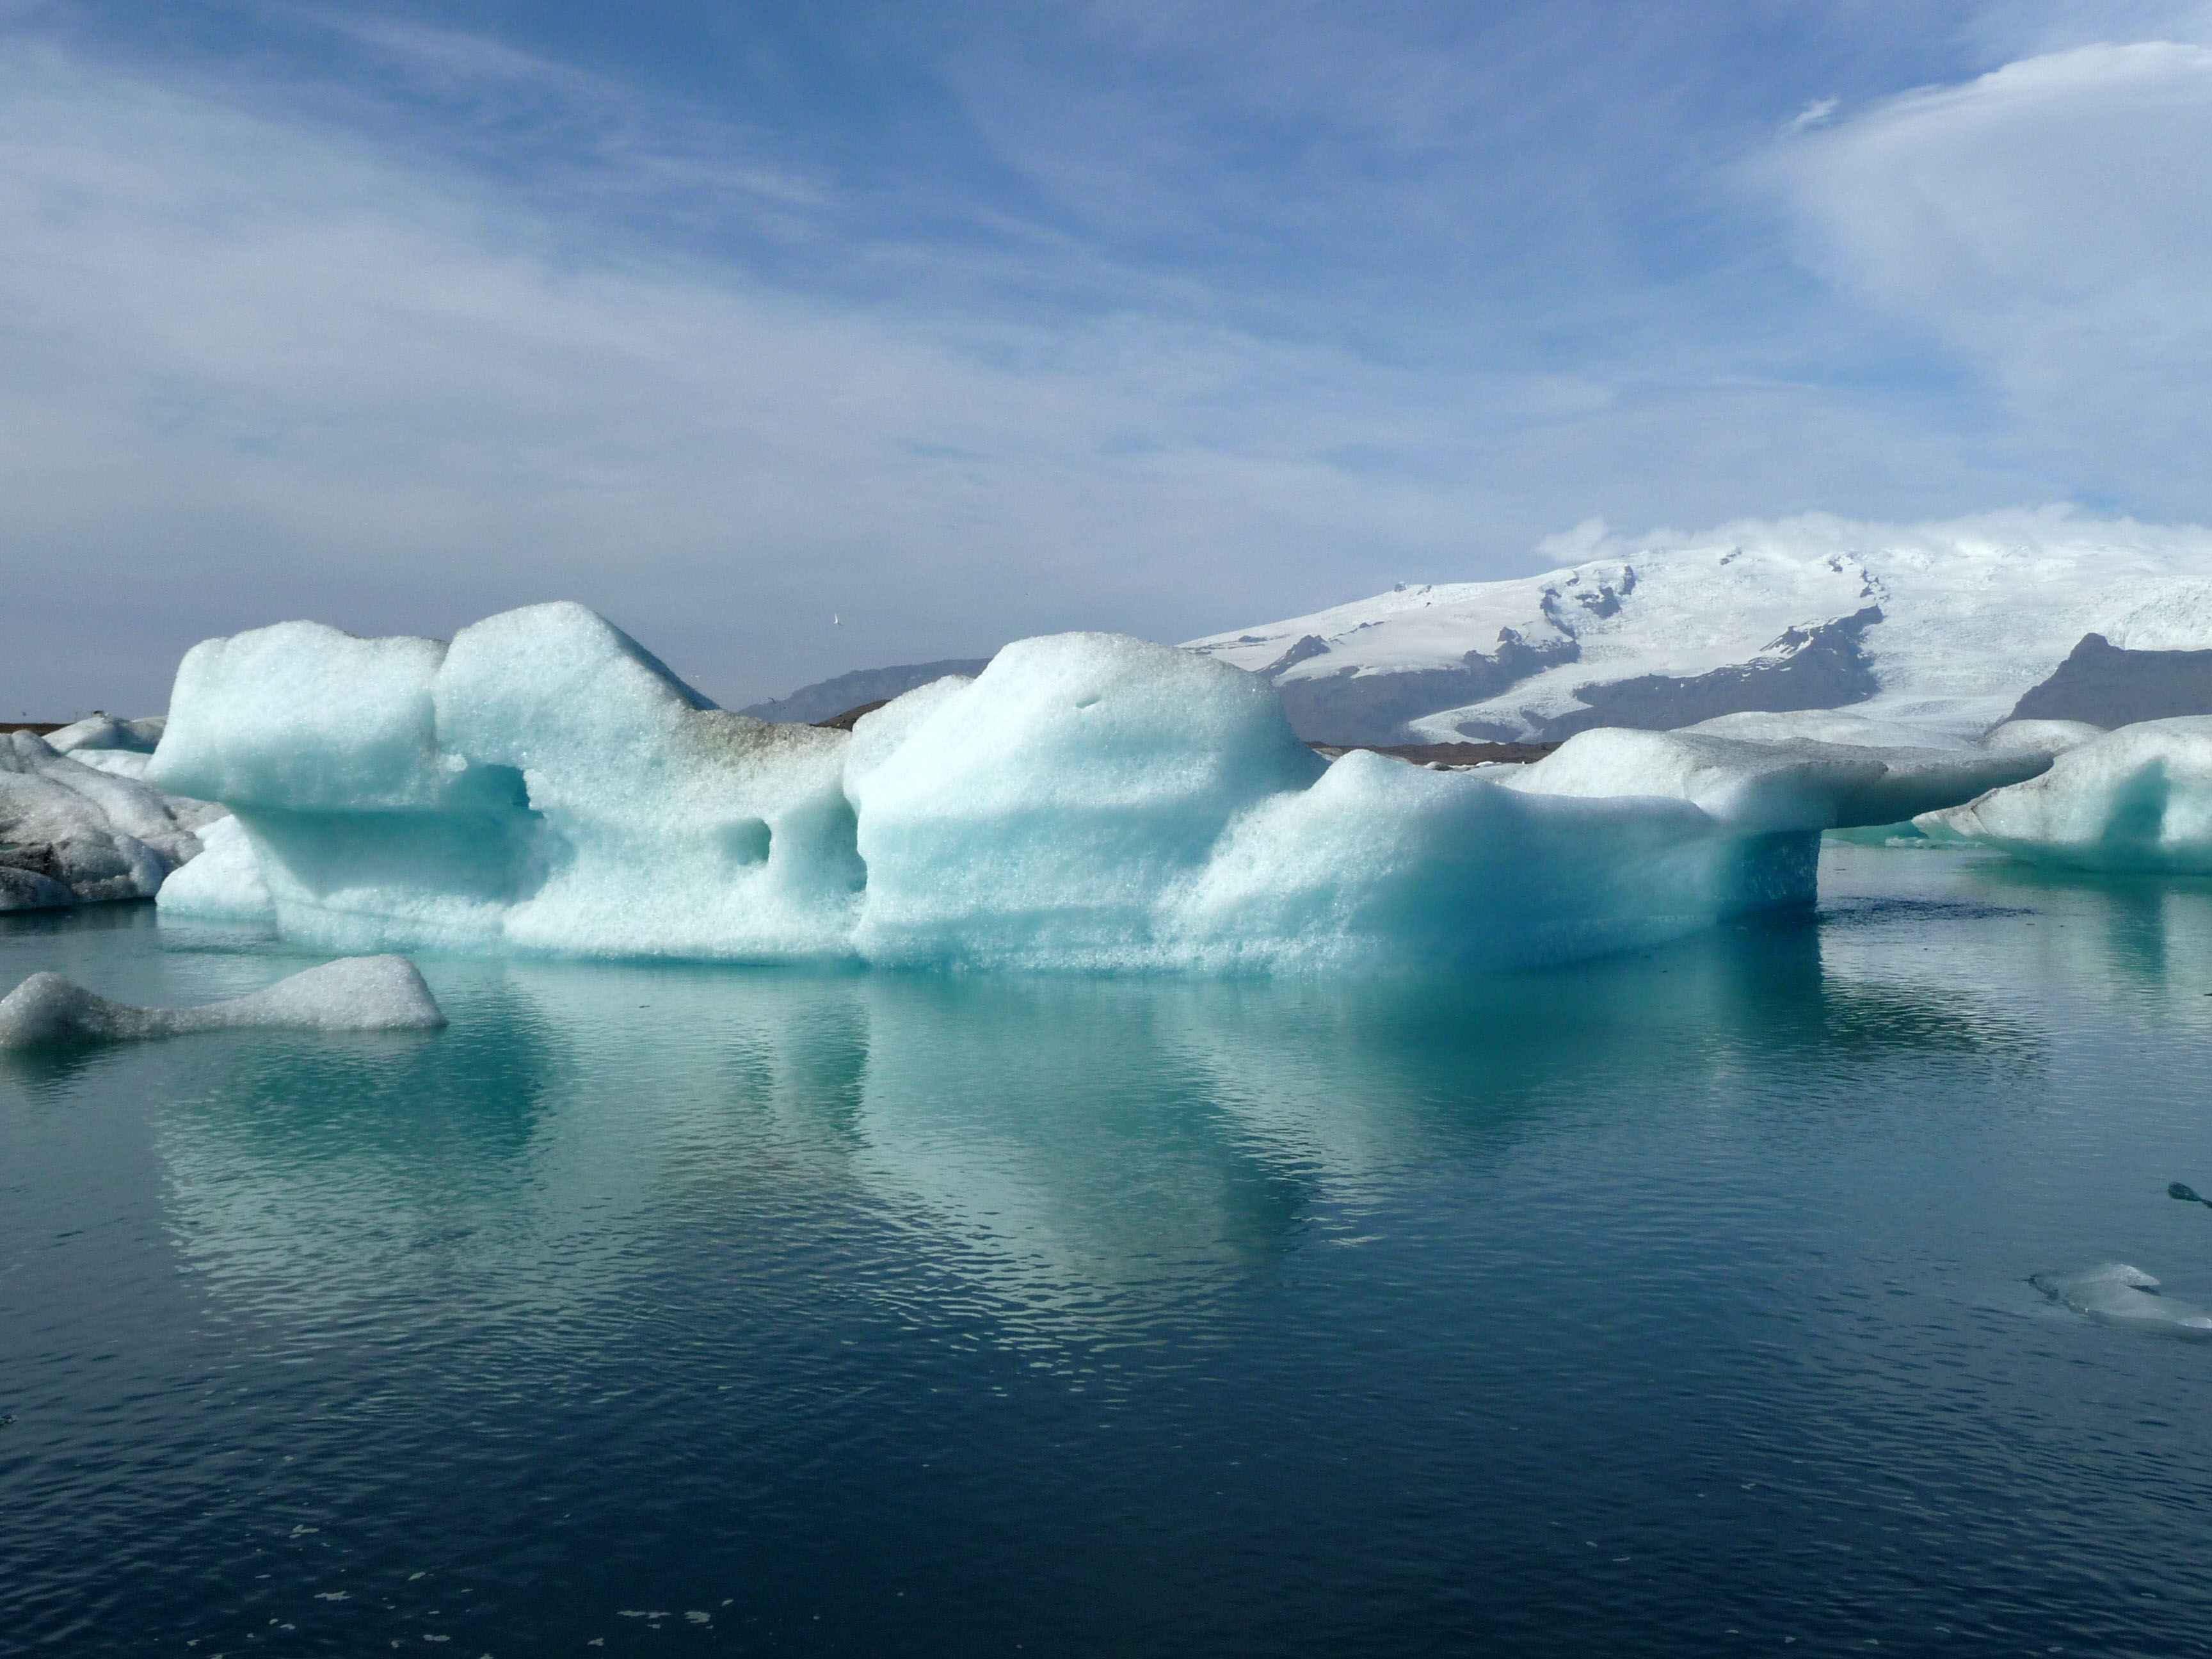 The best places for seeing icebergs